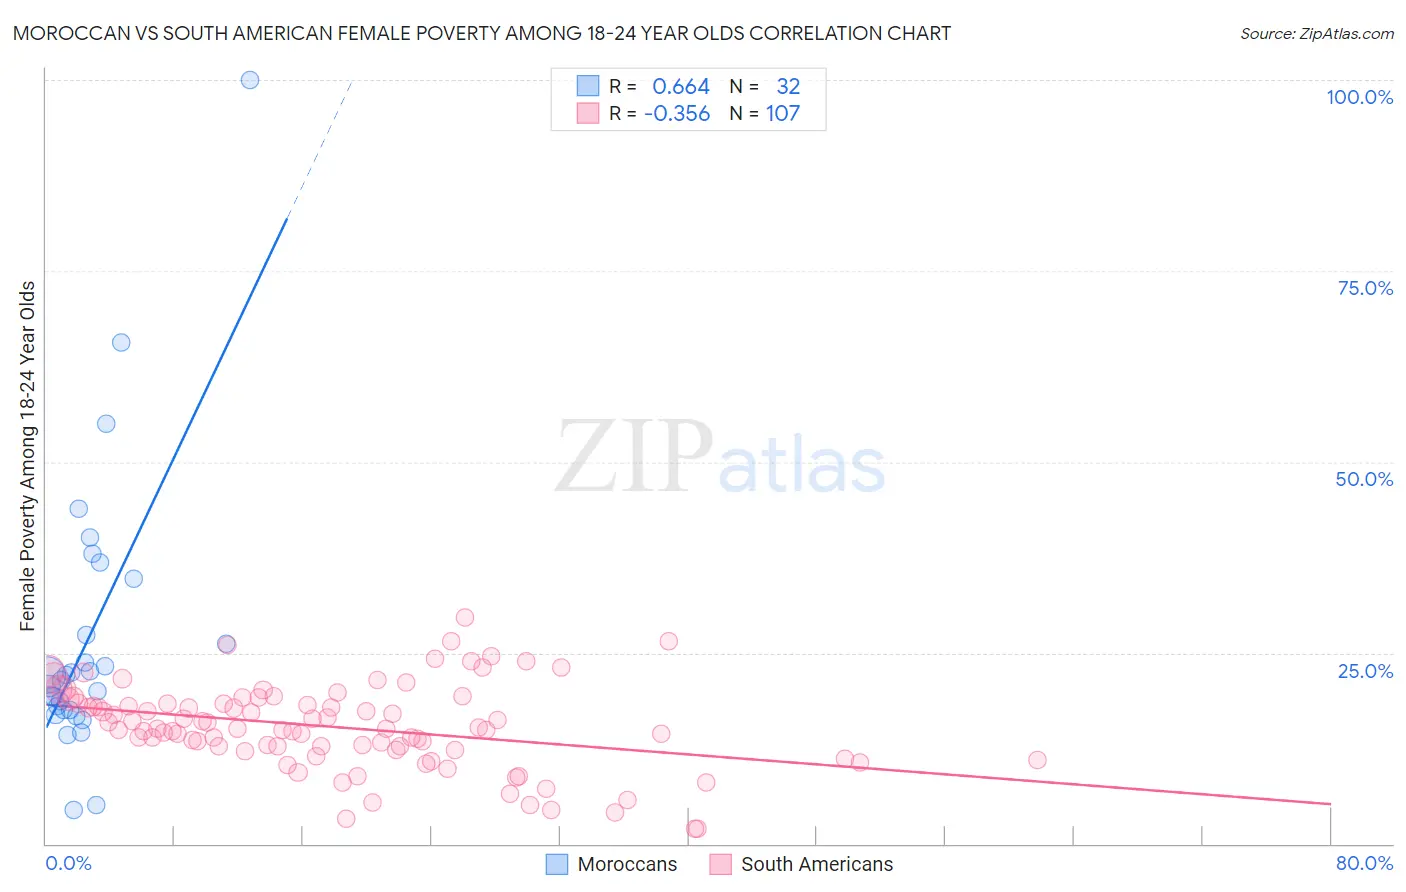 Moroccan vs South American Female Poverty Among 18-24 Year Olds